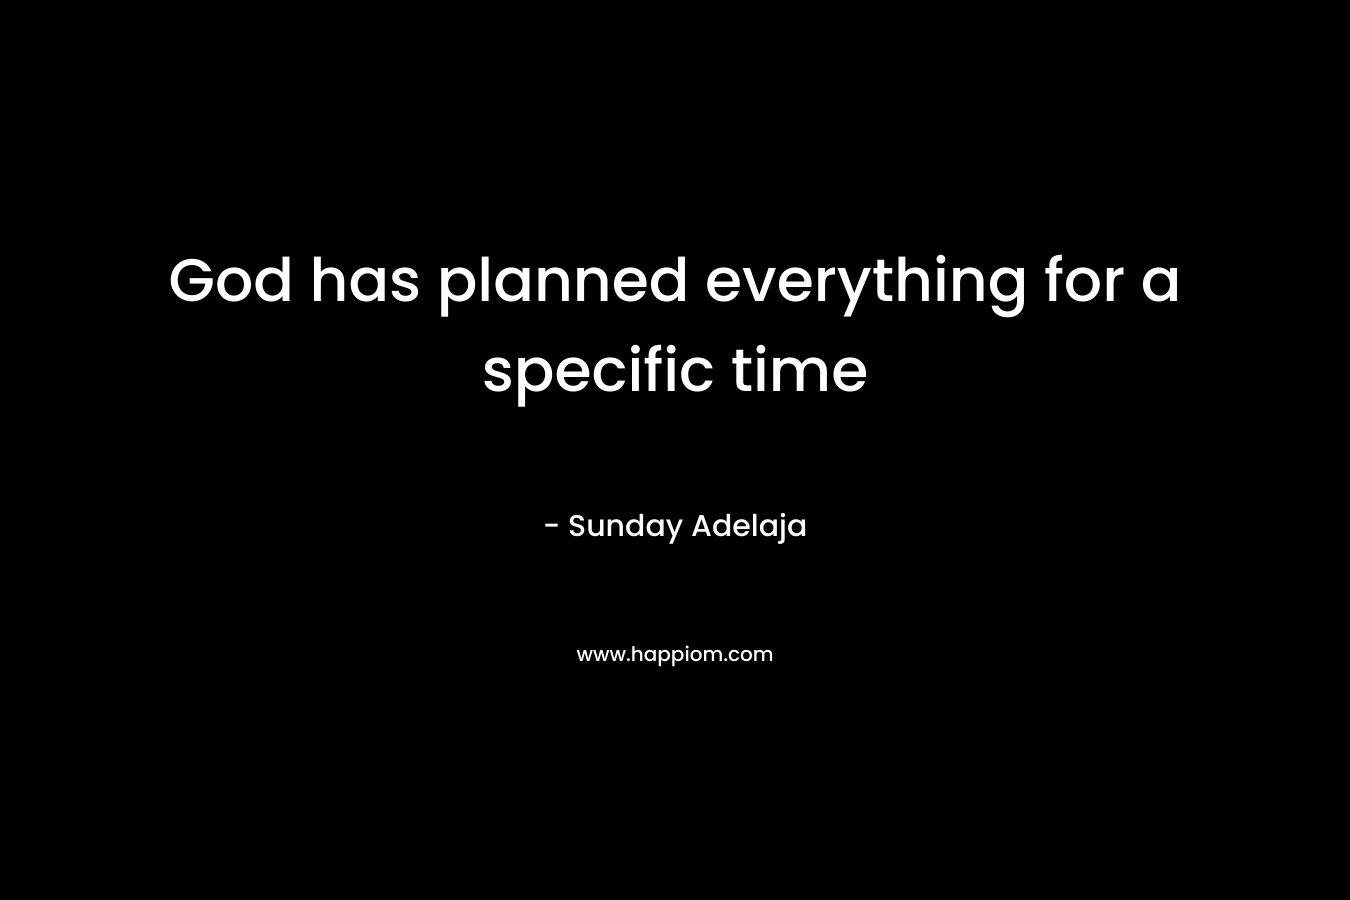 God has planned everything for a specific time